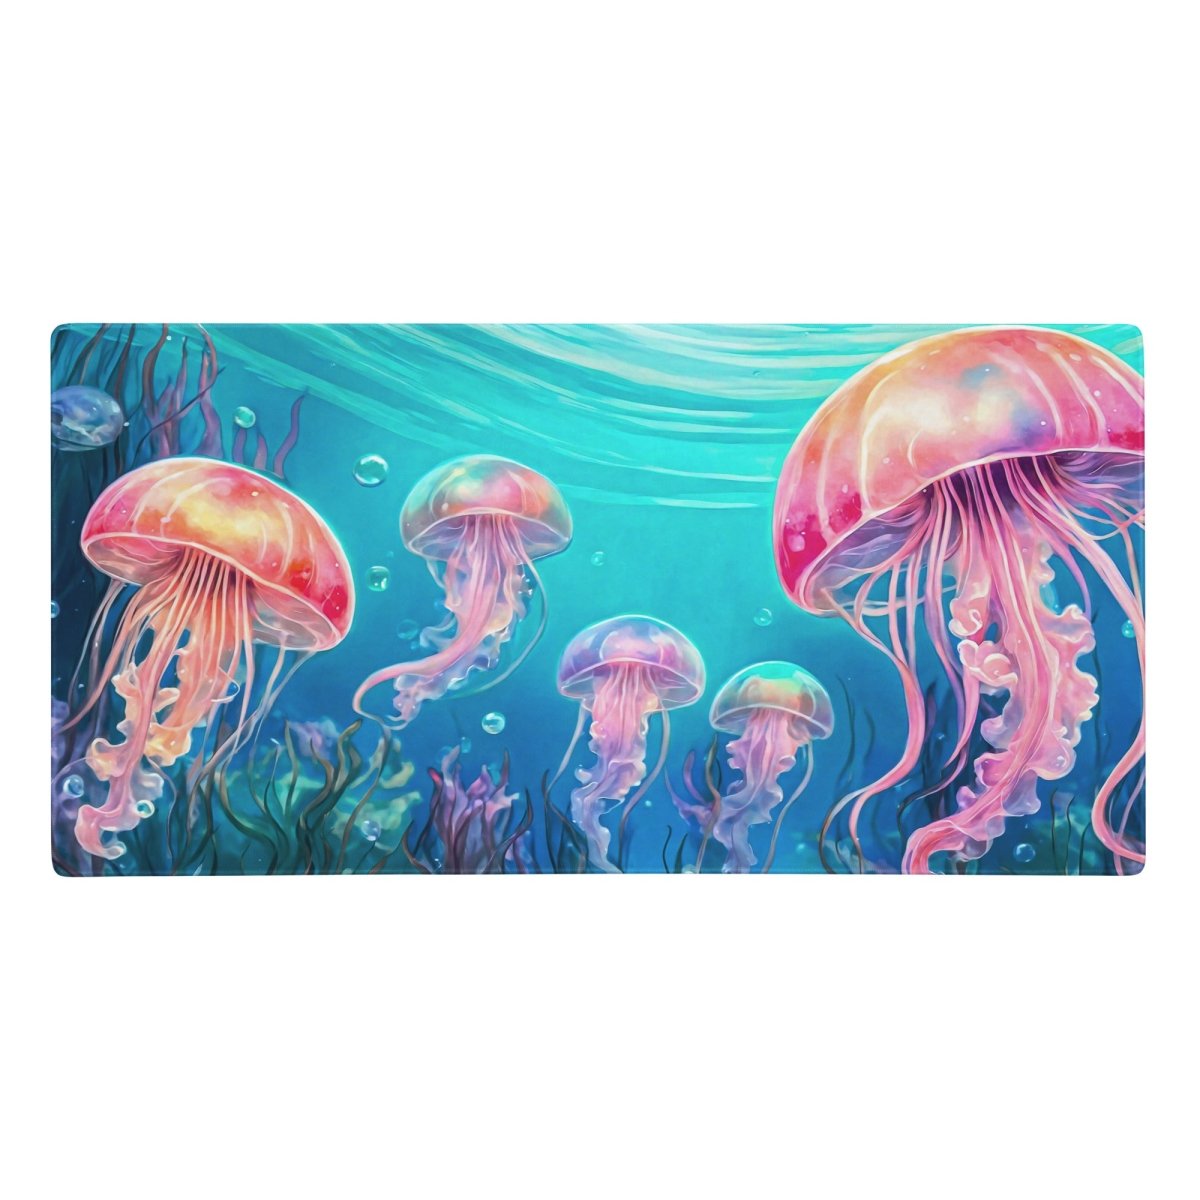 Neon jellyfish - Gaming mouse pad - Ever colorful